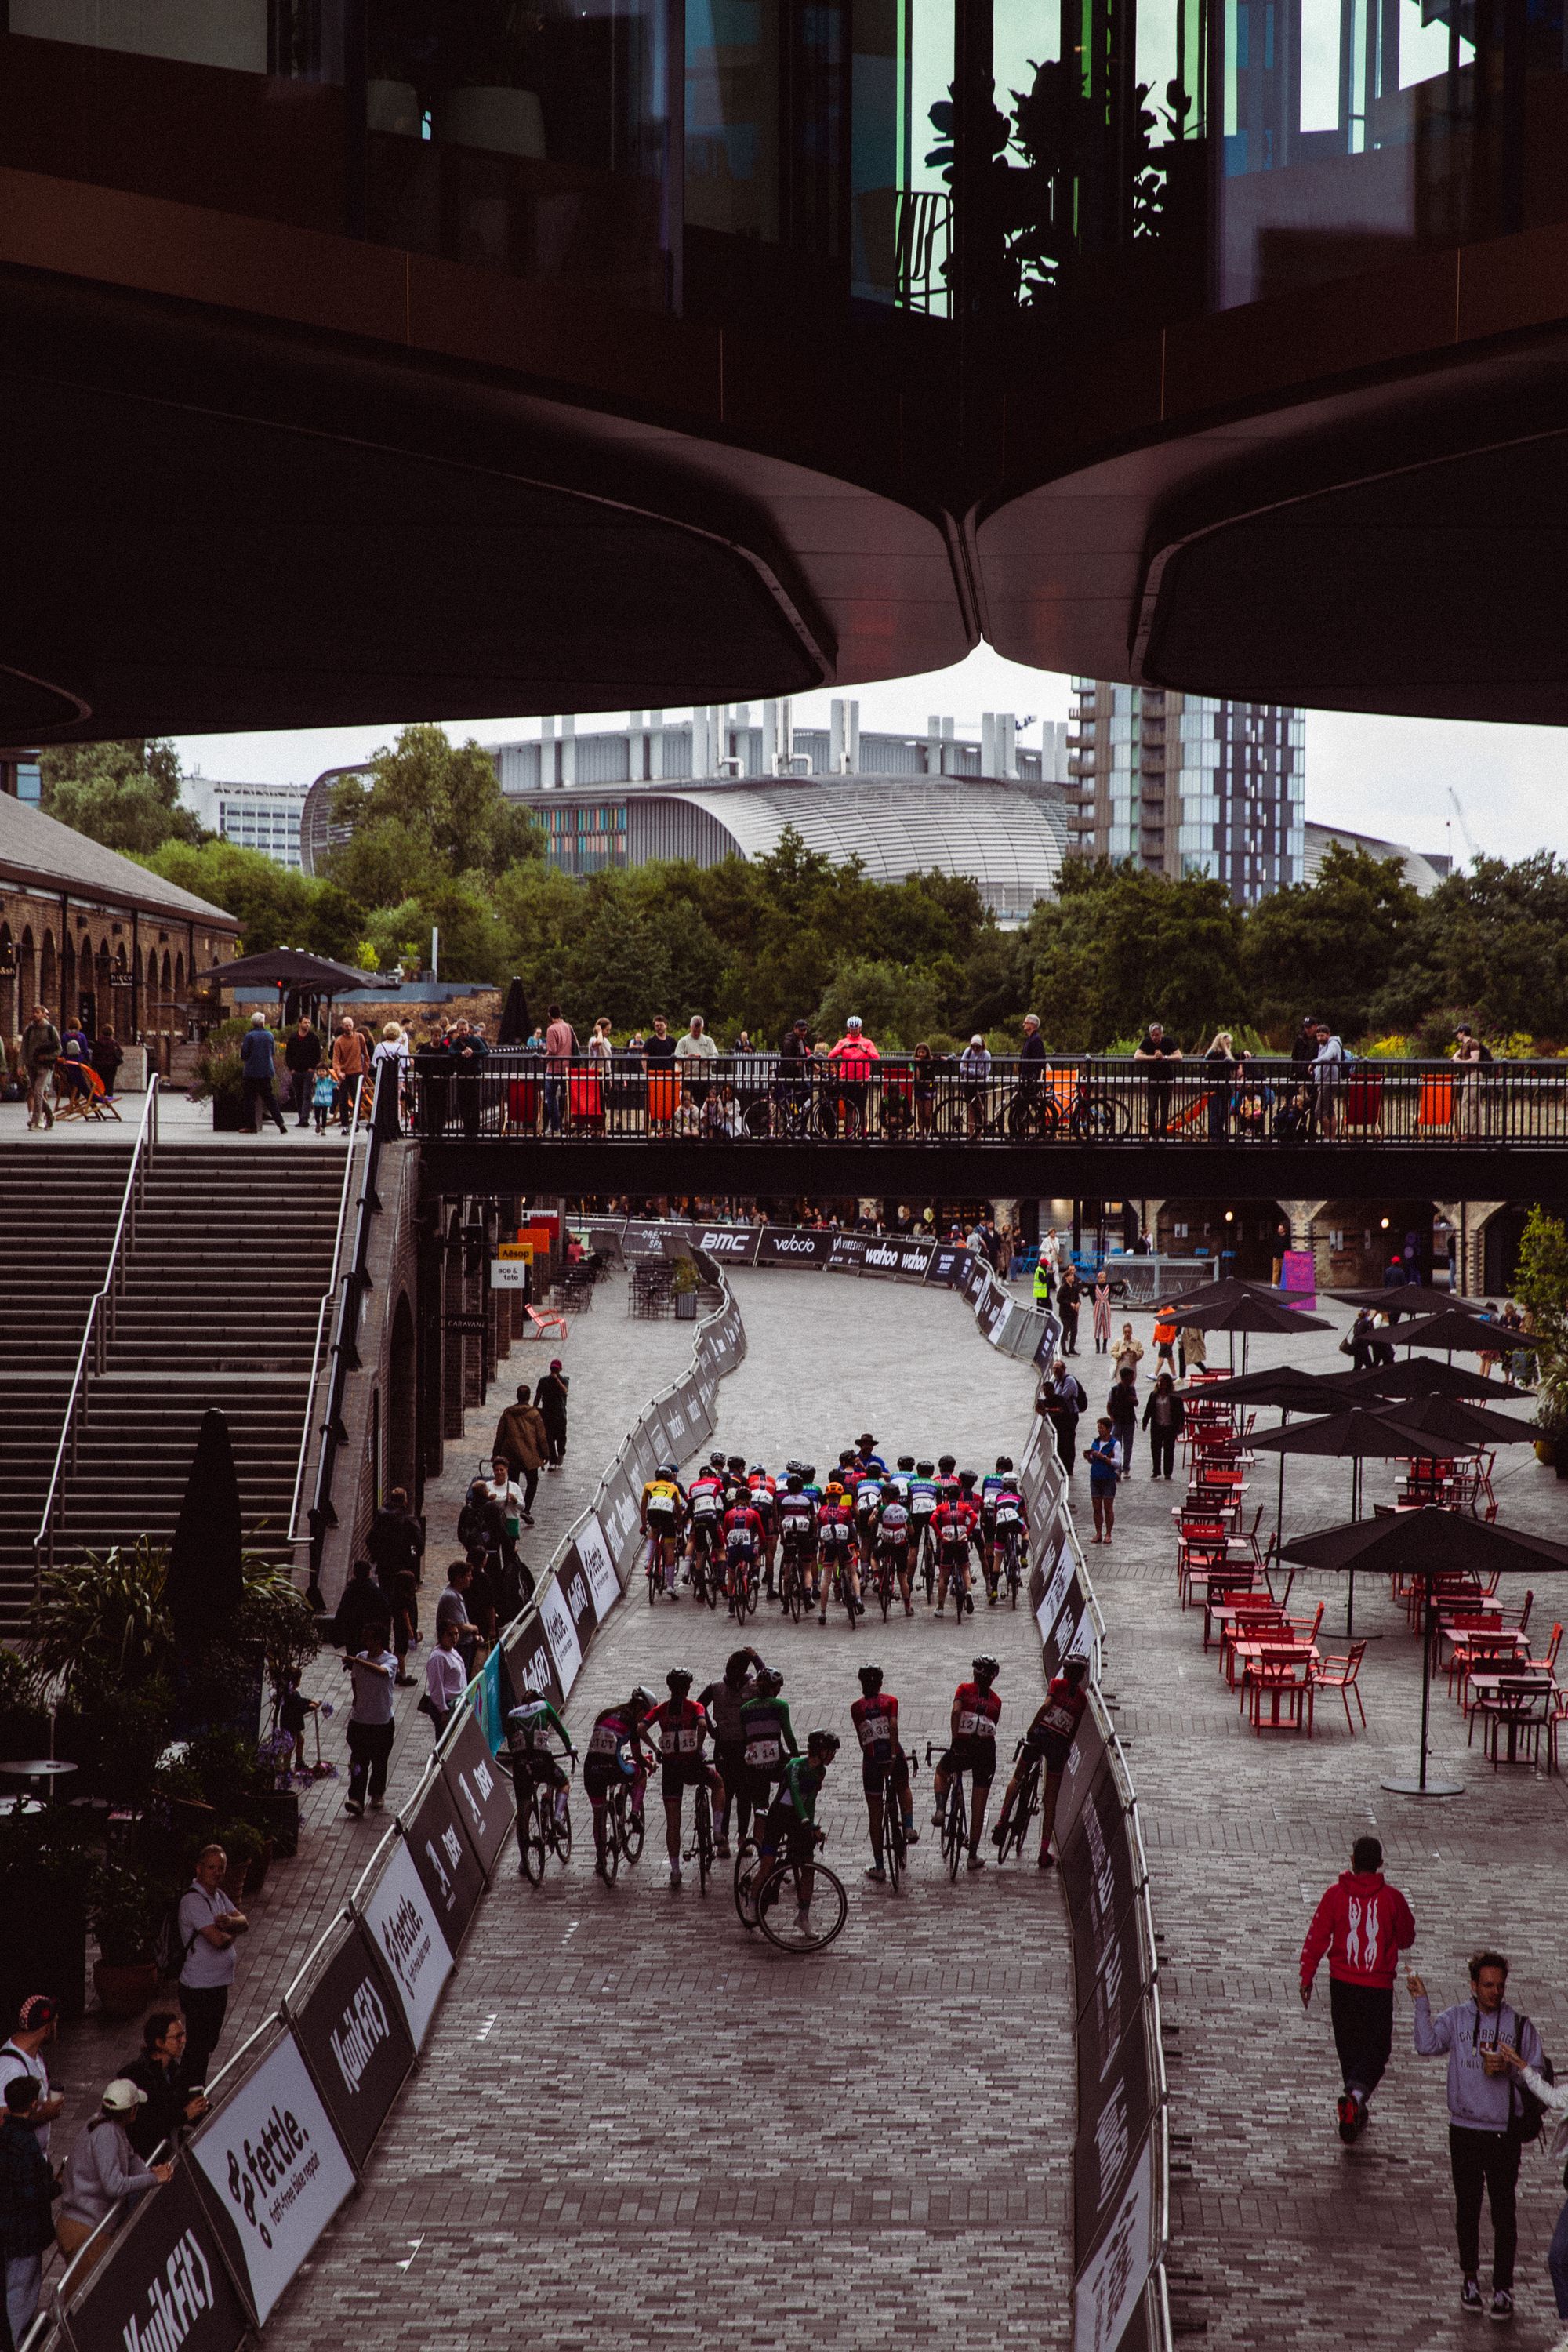 VIA Kings Cross Crit: An Unmissable Event in the Beating Heart of London